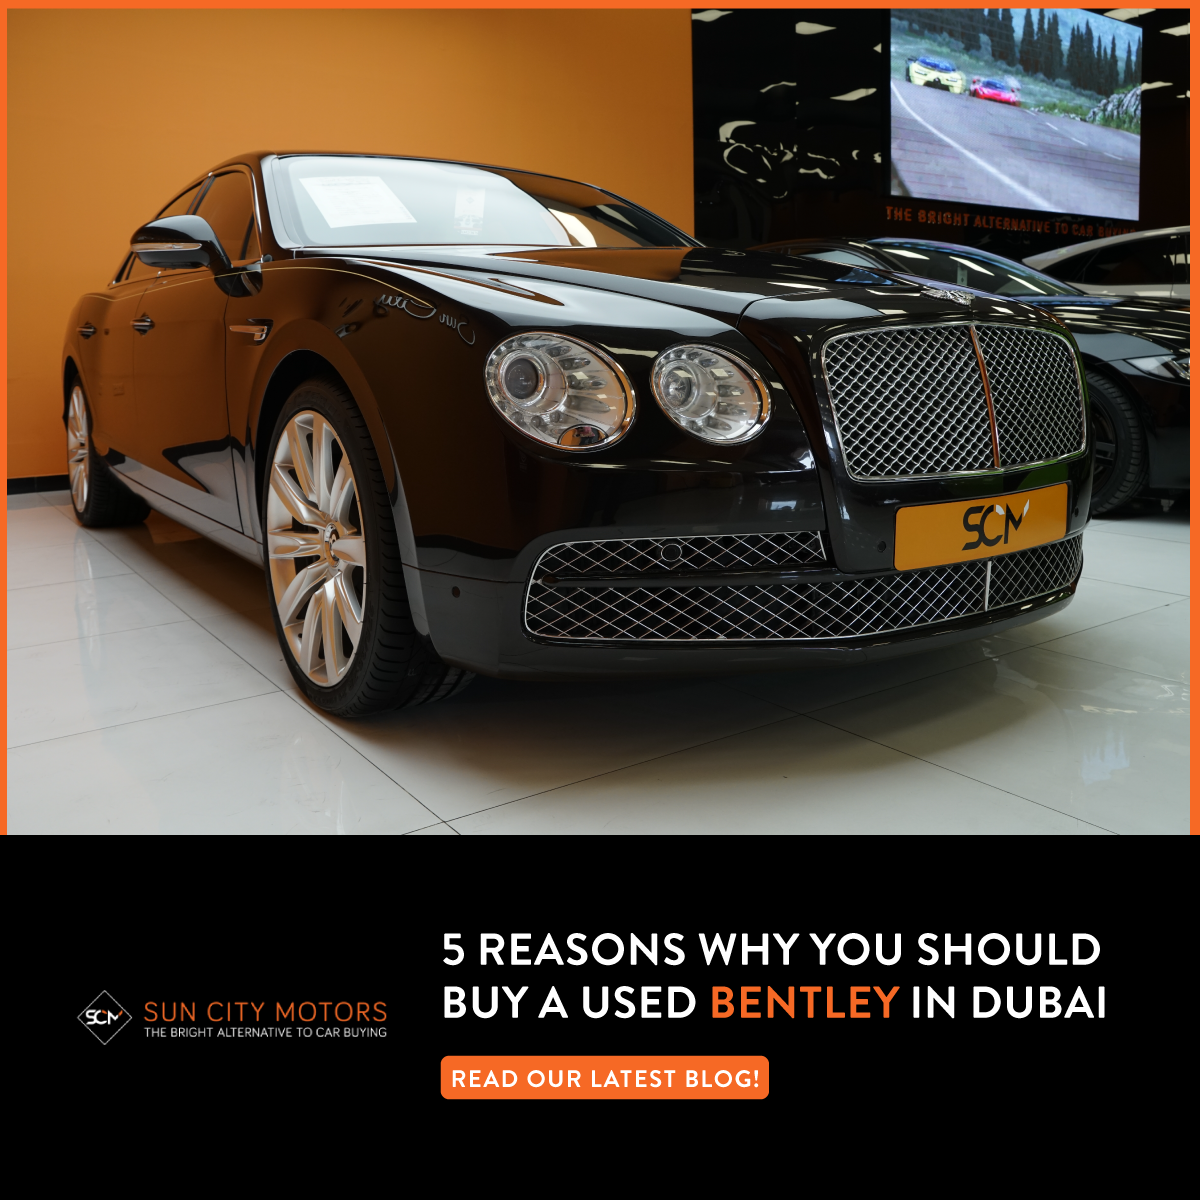 5 Reasons Why You Should Buy a Used Bentley in Dubai